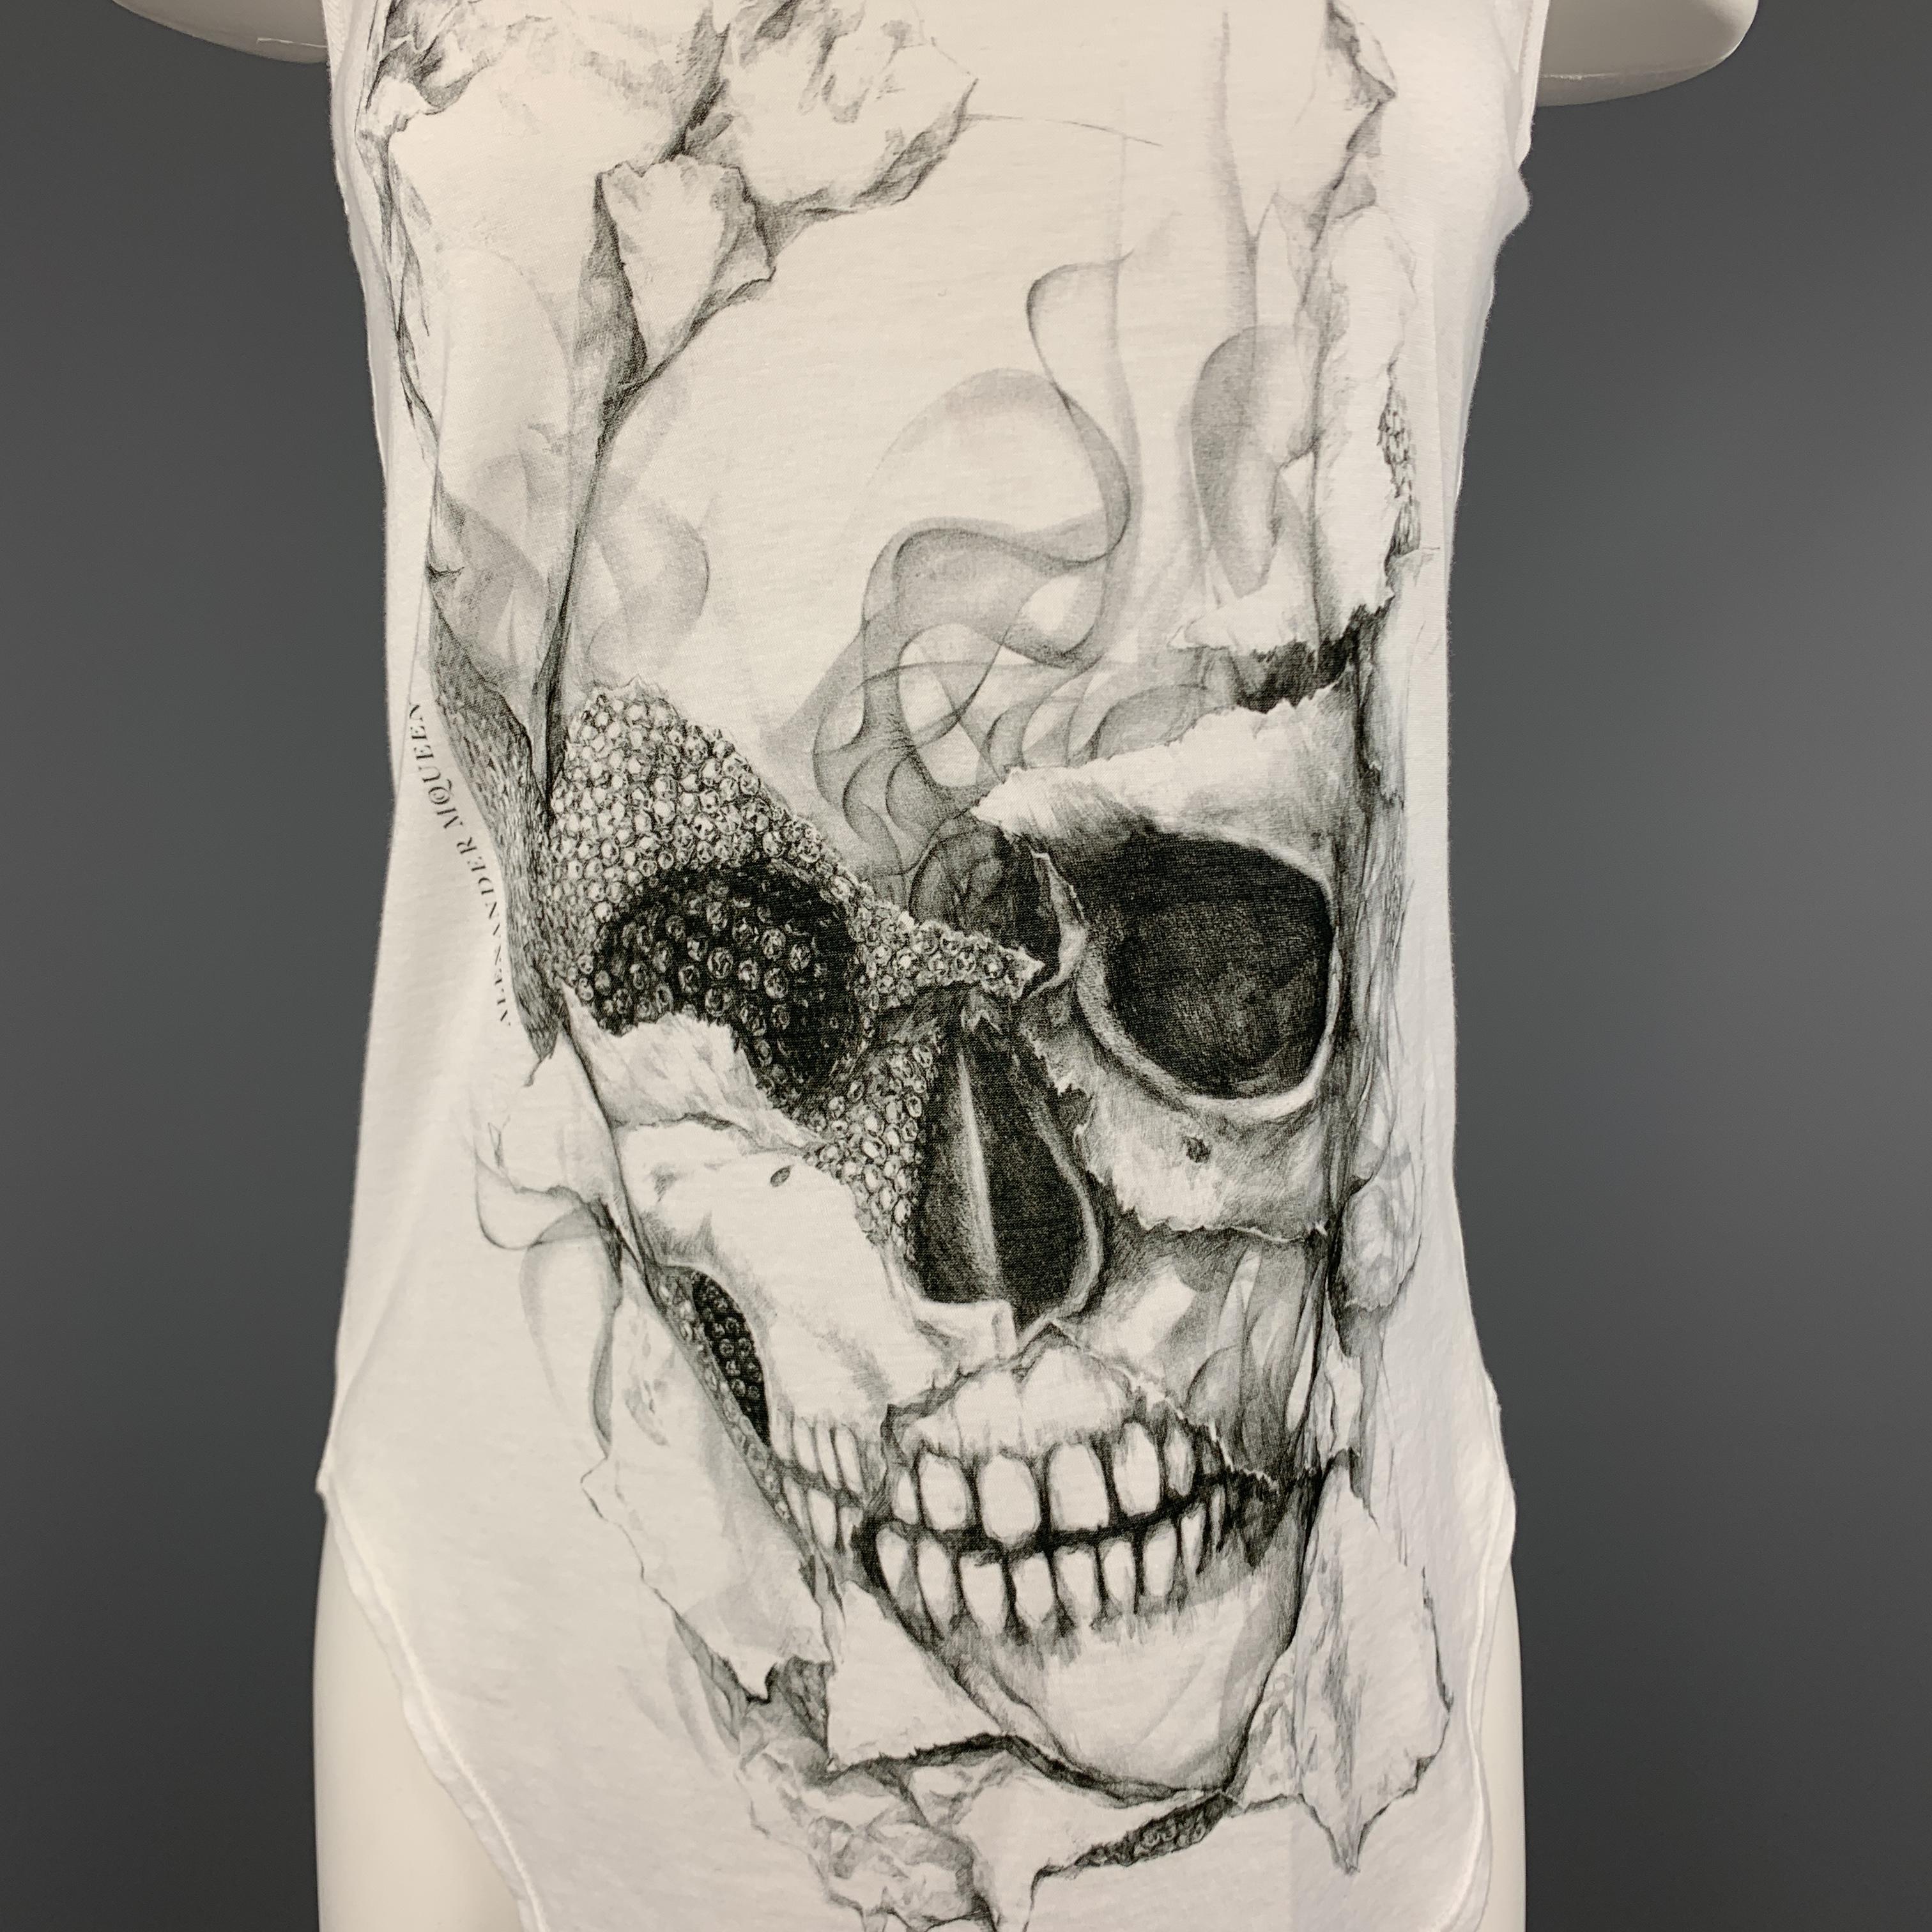 ALEXANDER MCQUEEN tank top comes in white burnout jersey with a black smoke skull graphic. Made in Italy.

Excellent Pre-Owned Condition.
Marked: IT 38

Measurements:

Shoulder: 10.5 in.
Bust: 34 in.
Length: 25.5 in.